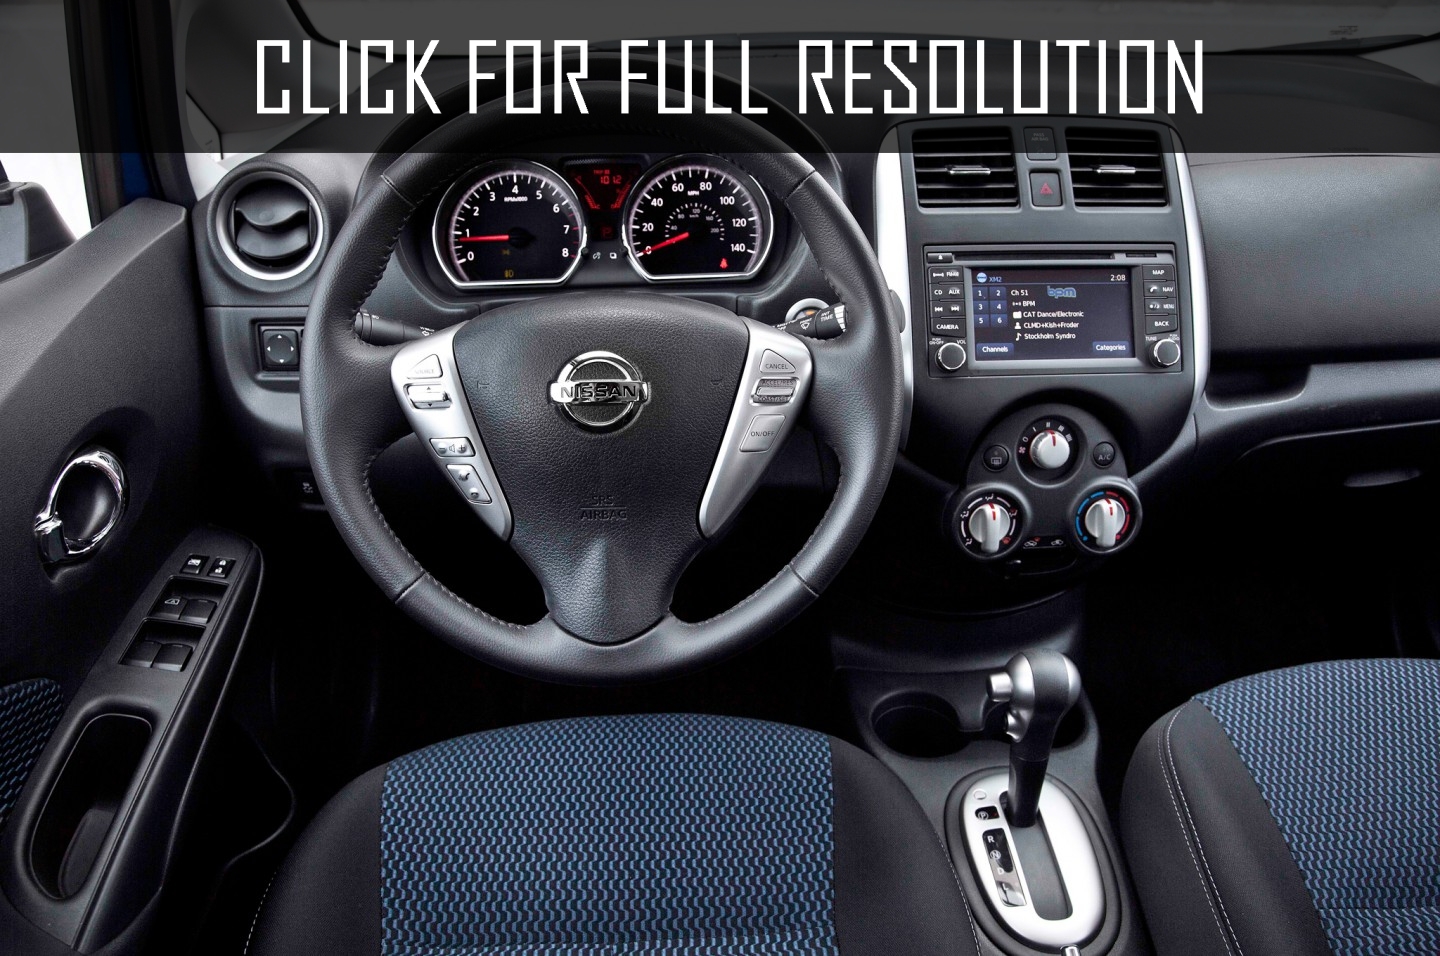 Nissan Versa Note Sv 2014 Reviews Prices Ratings With